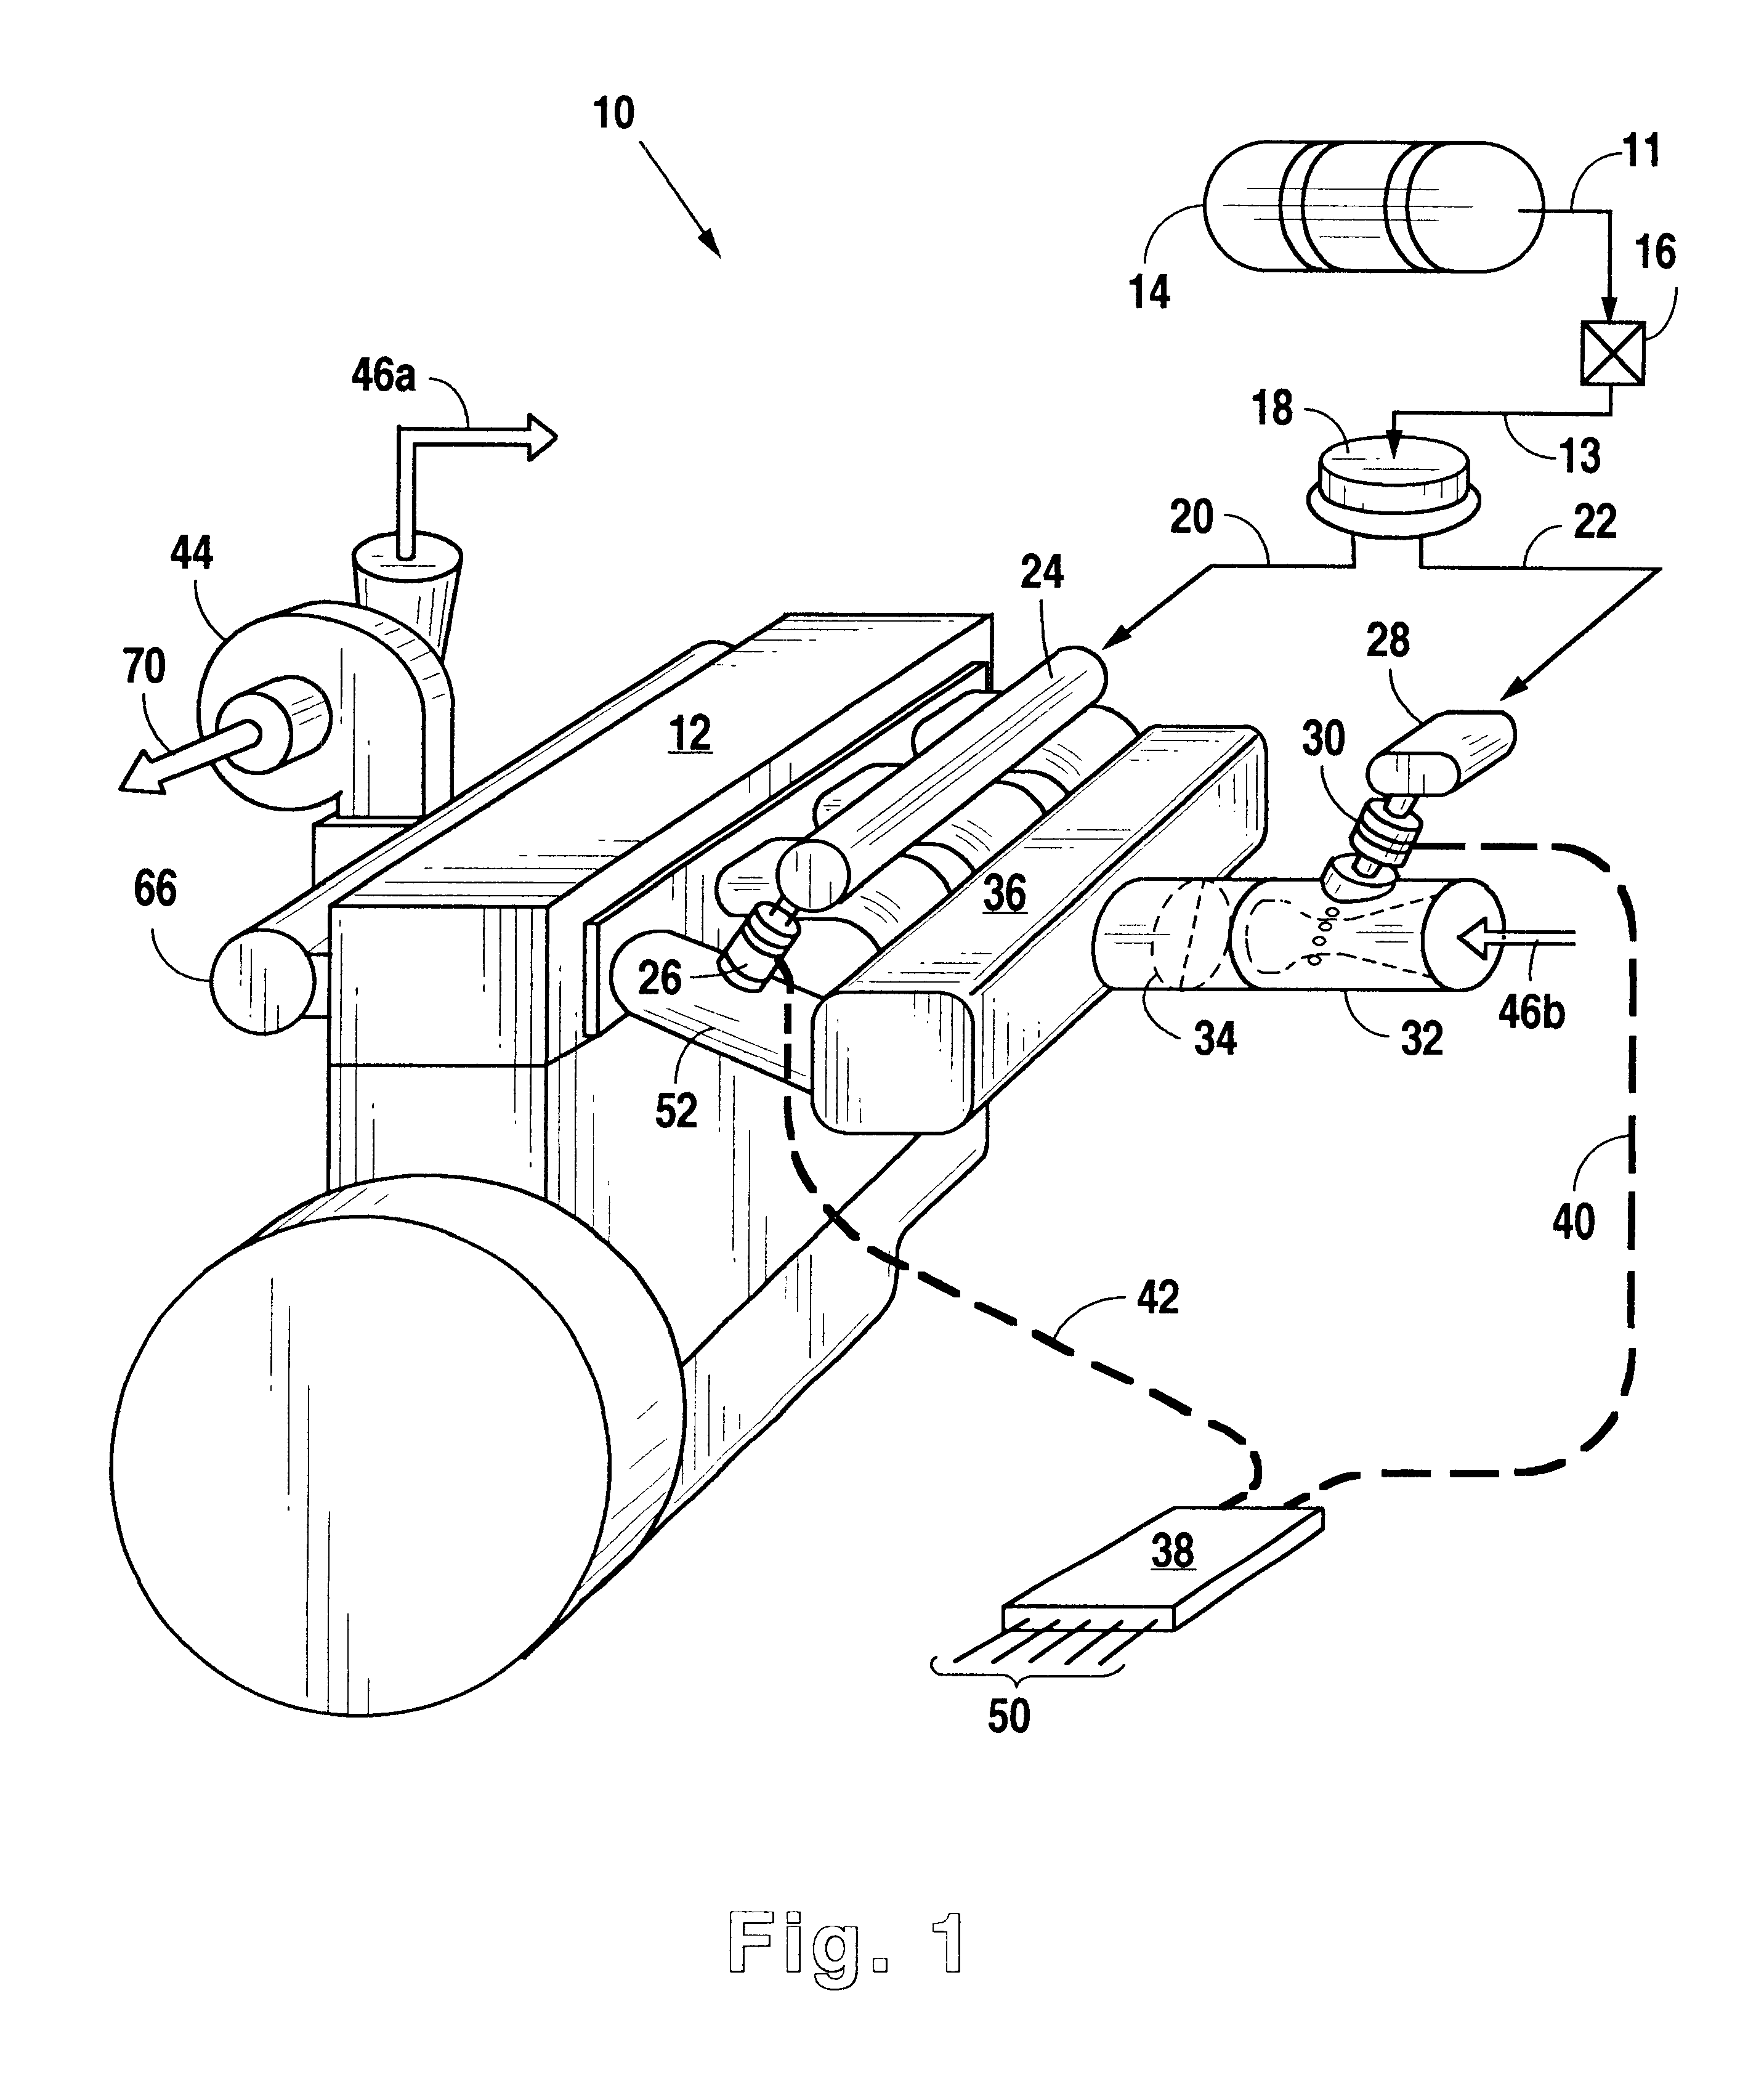 Fuel system with dual fuel injectors for internal combustion engines